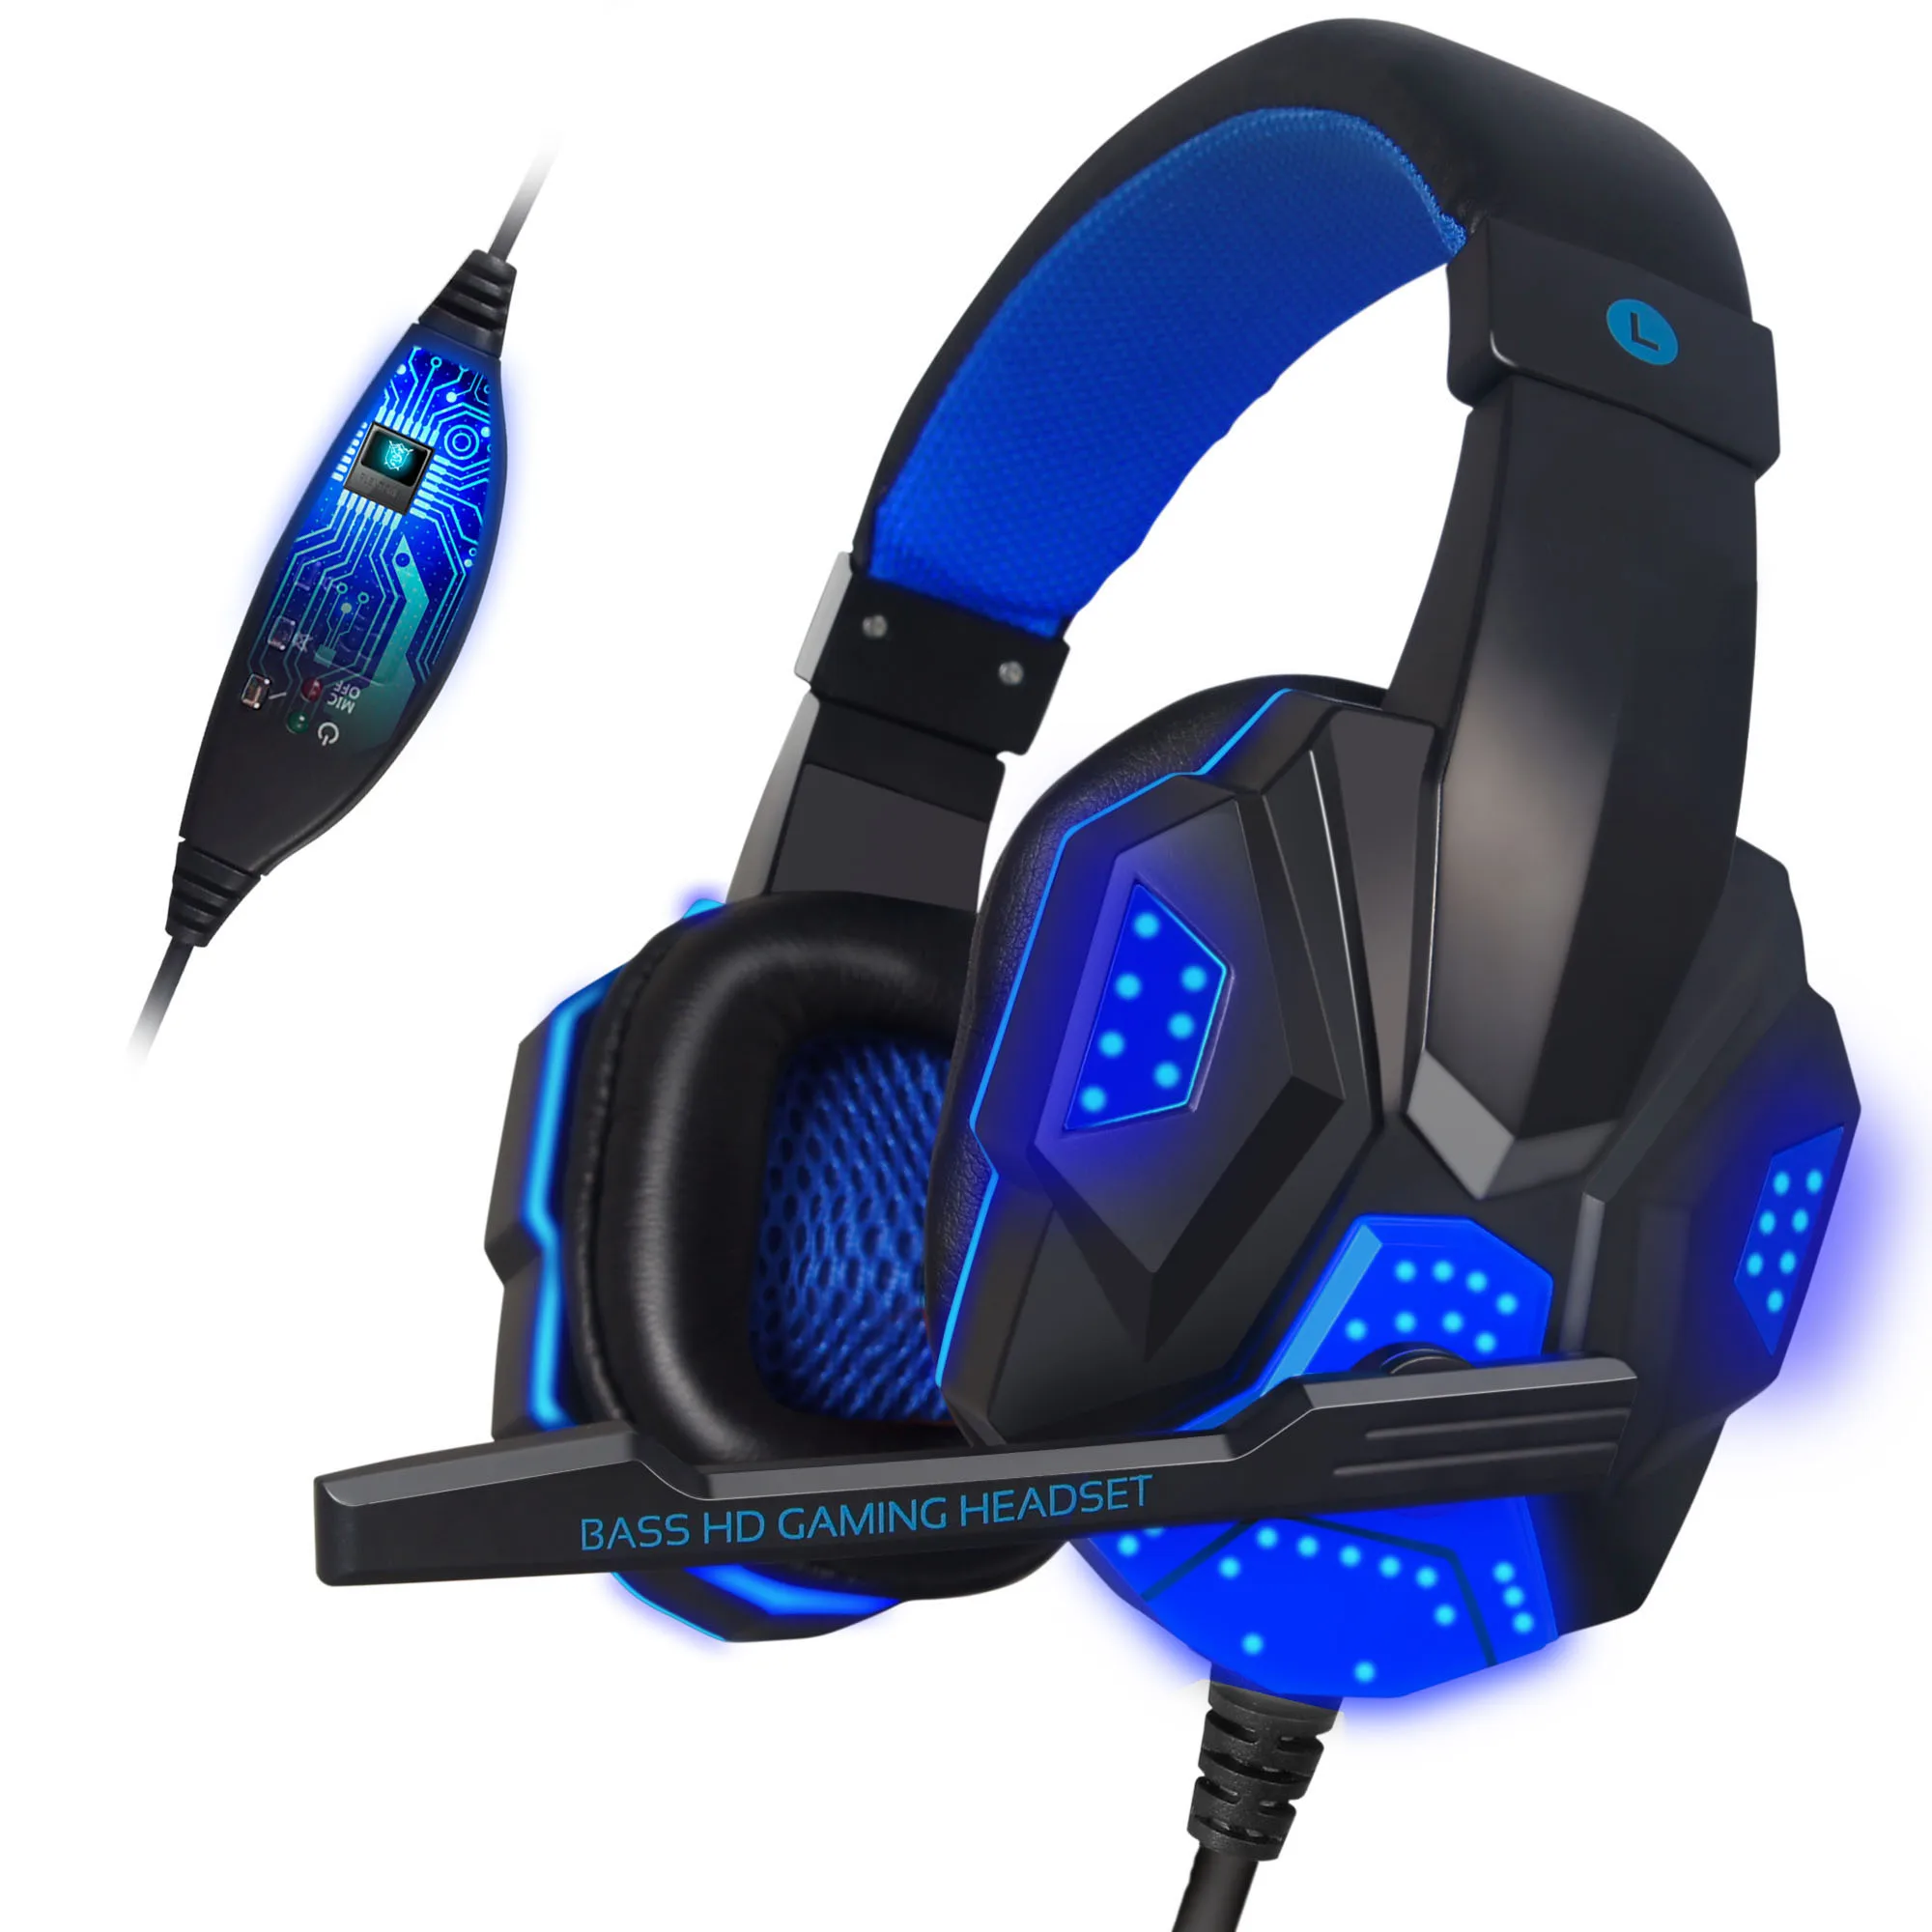 

7.1 Virtual Surround Head set Gaming Color LED Light Gamer Headphones With Super Bass ANC Mic For PC PS4 Gray Green